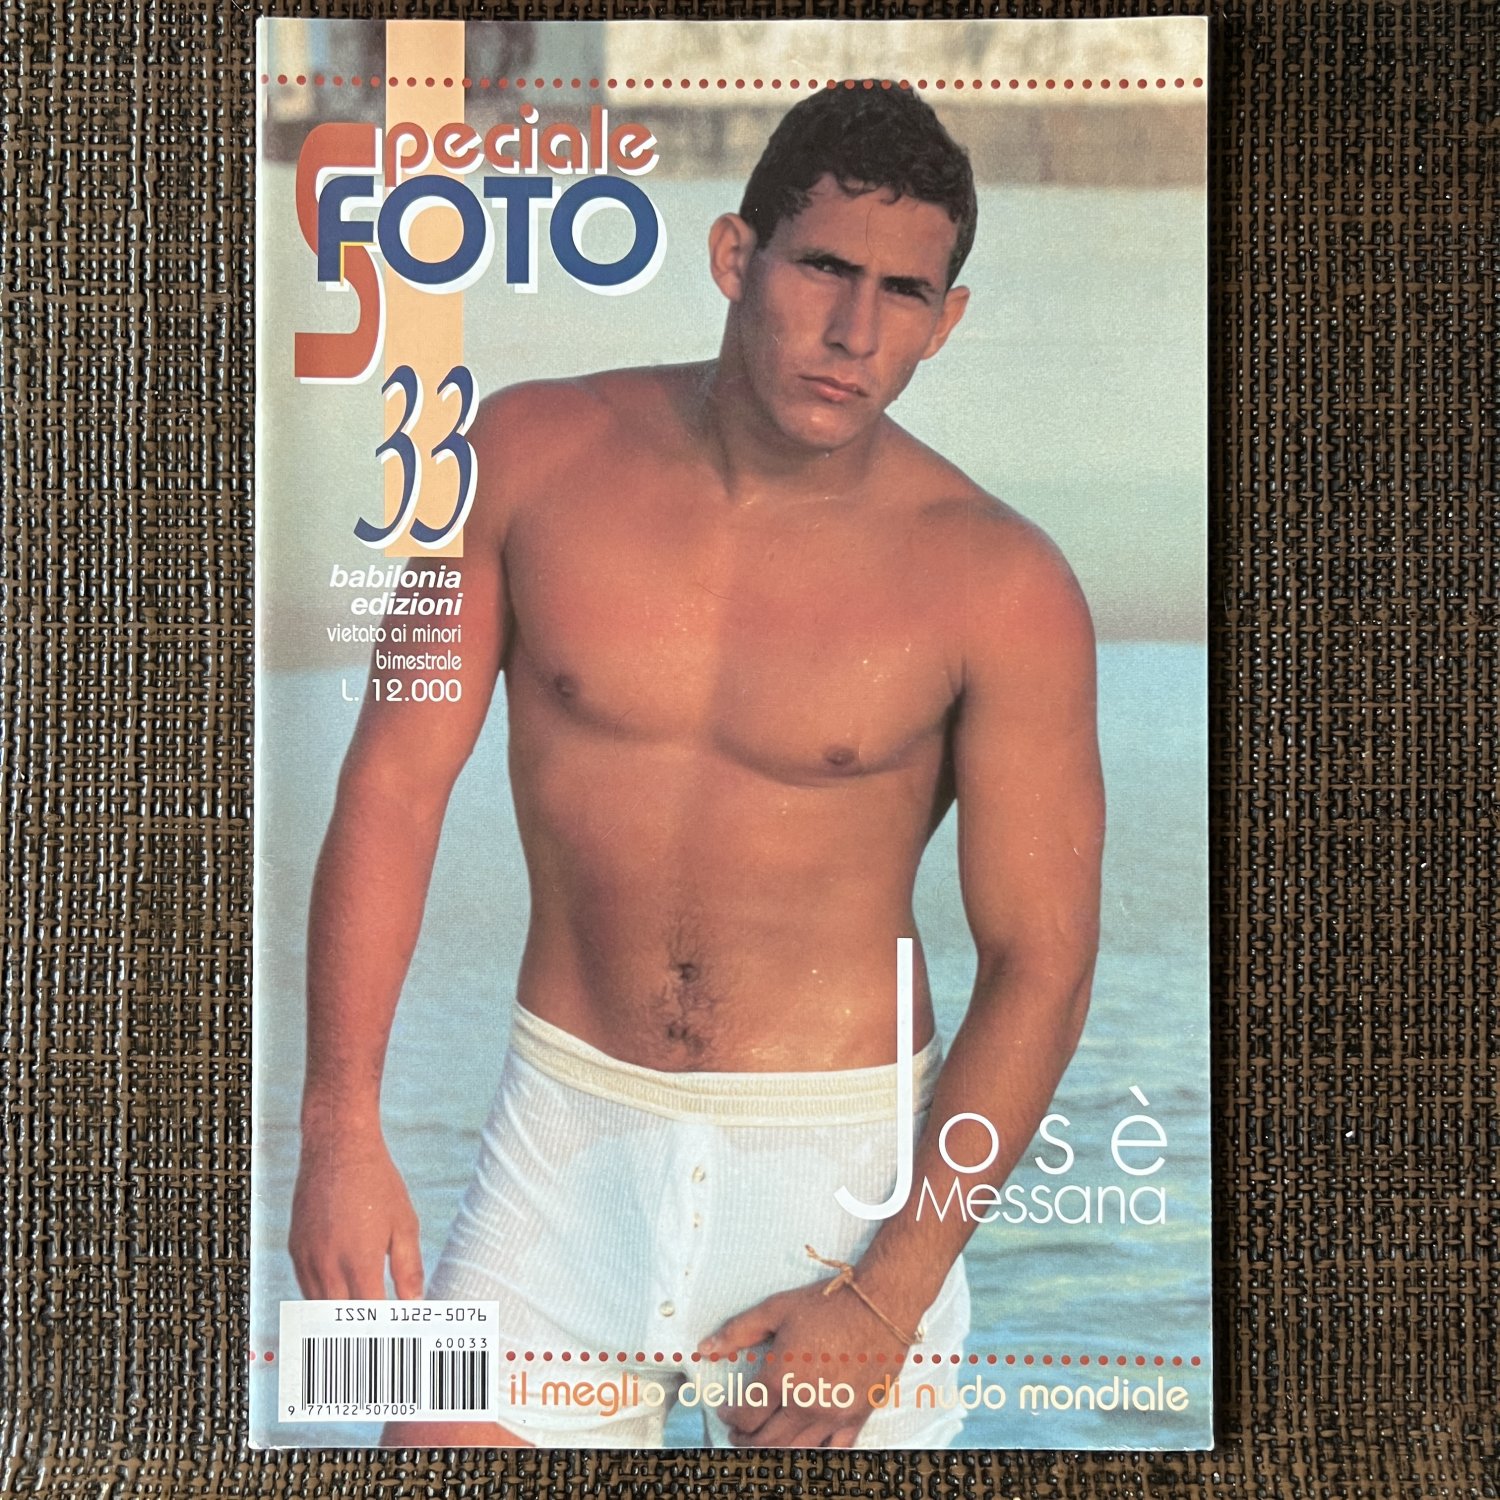 SPECIALE FOTO #33 (1997) JOSE MESSANA ITALIAN Physique 18+ Uncut Muscle Smooth Athletic Jocks Nudes